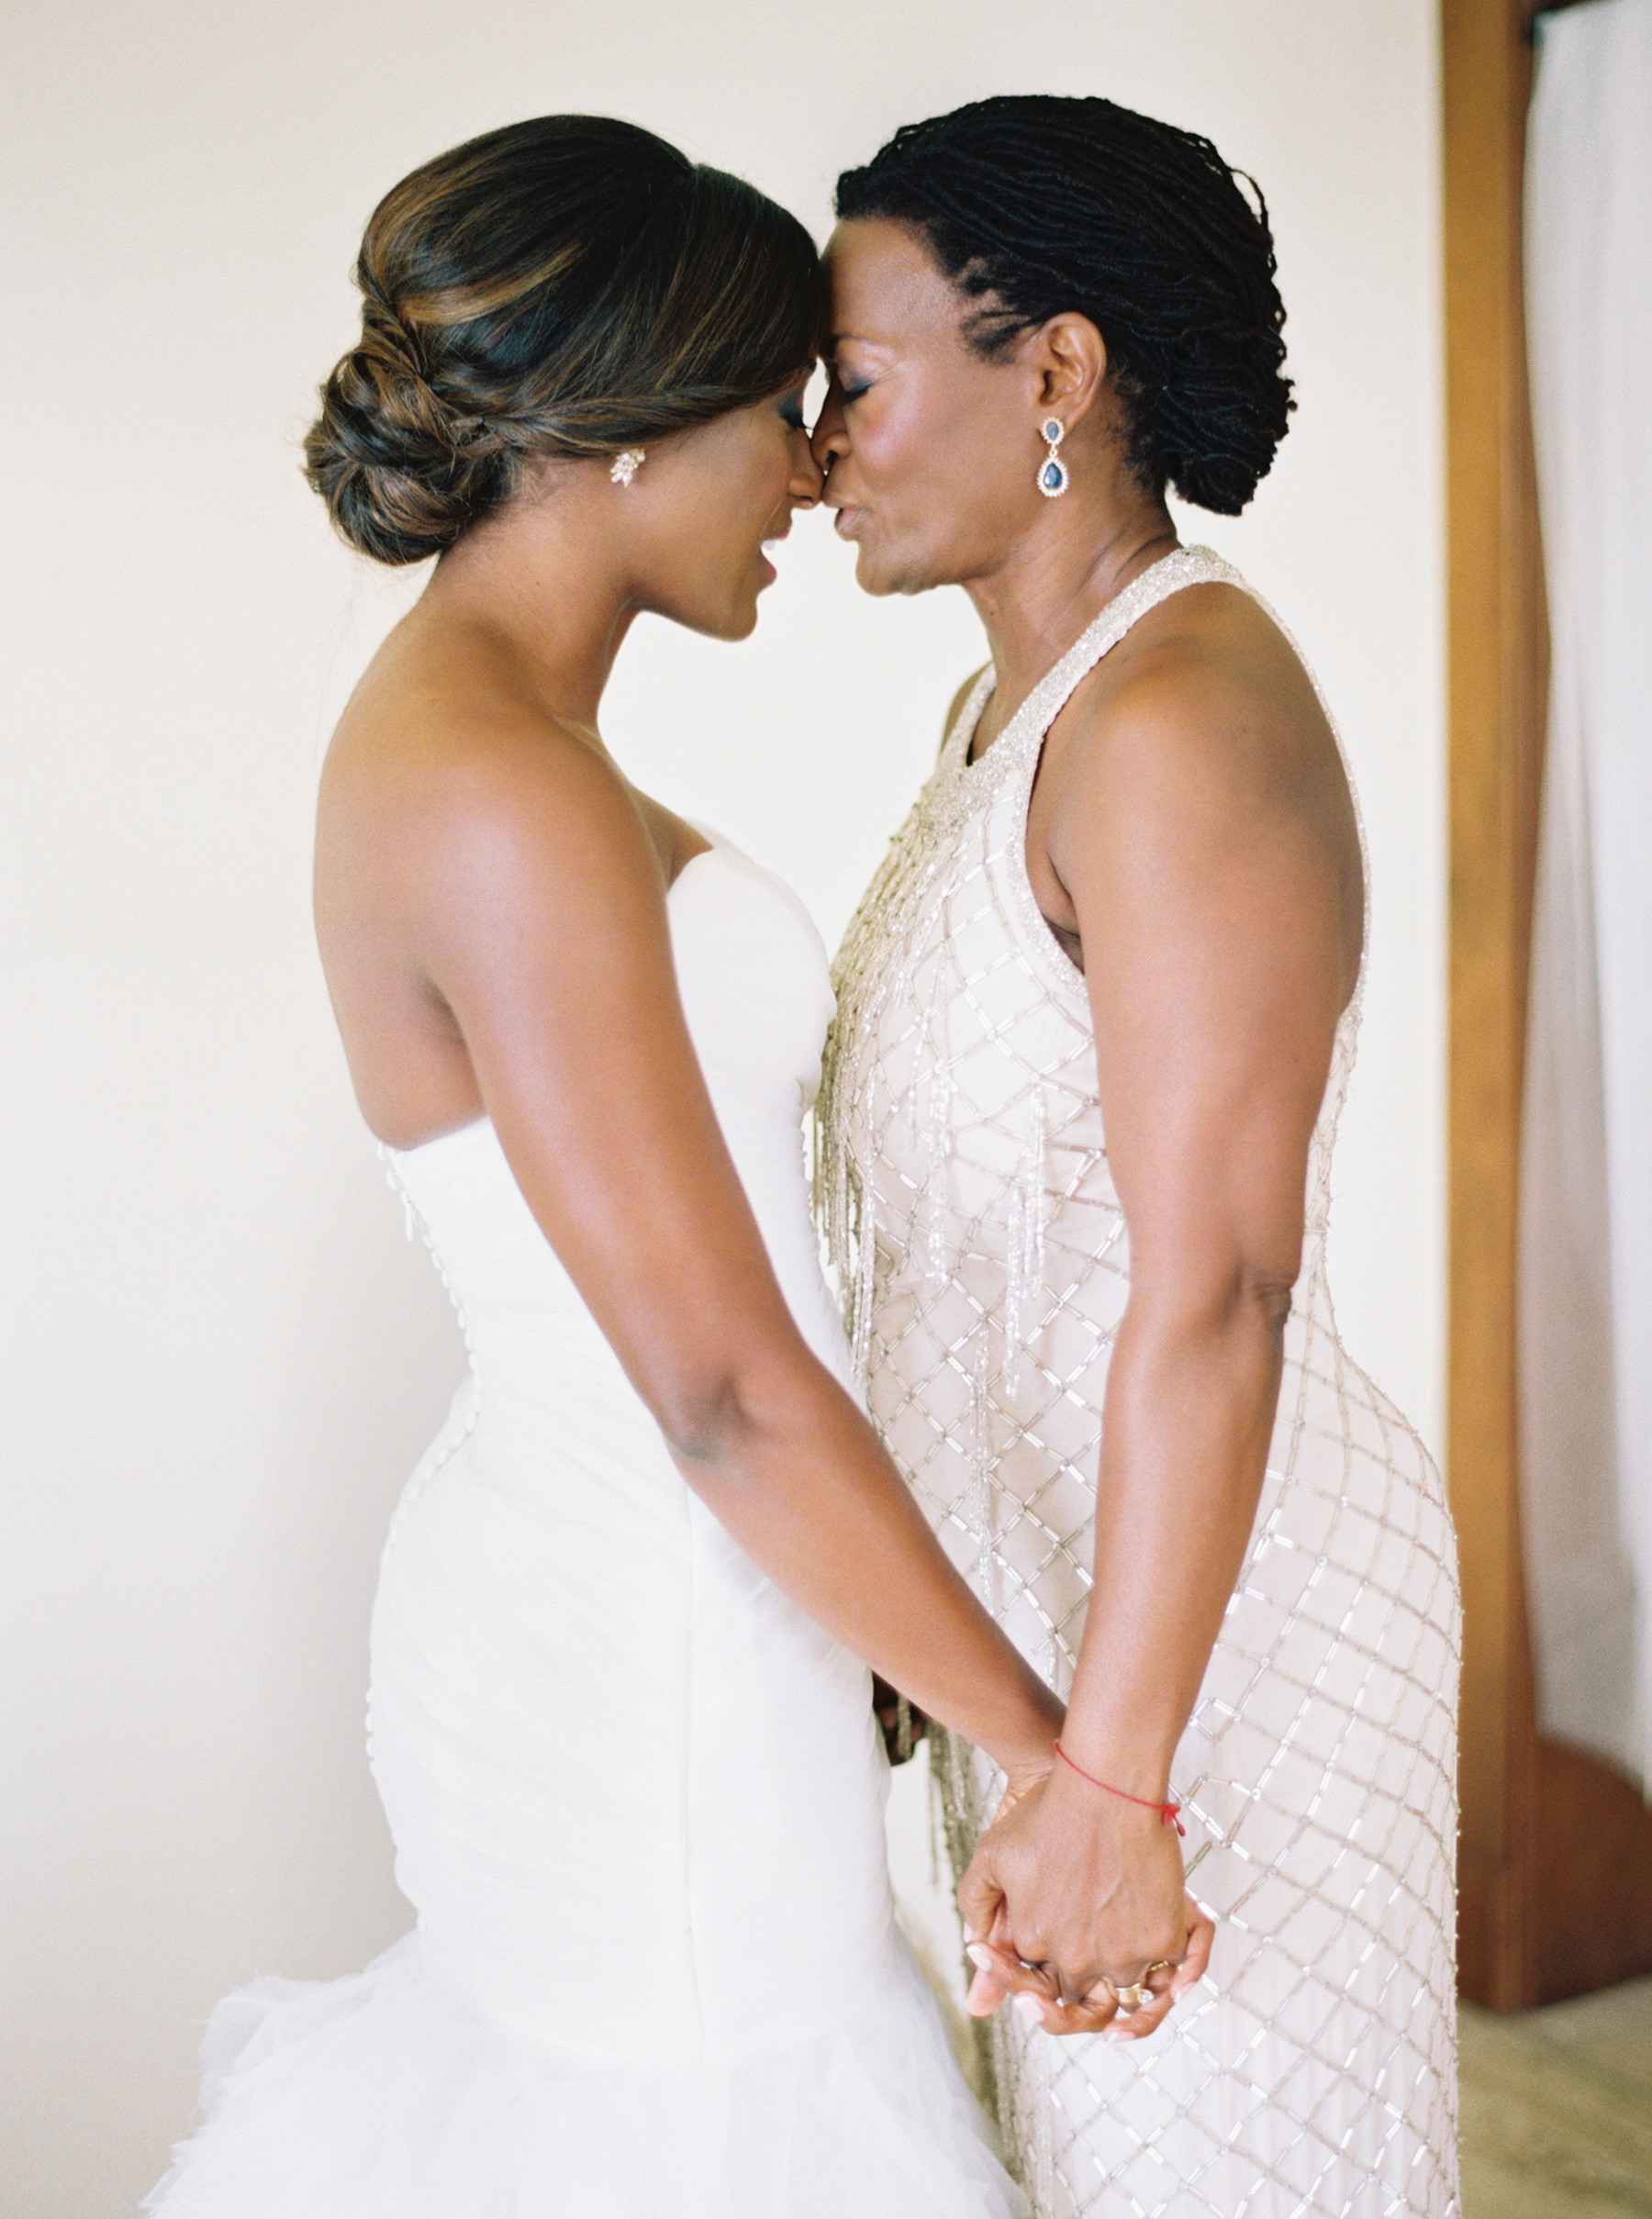 Black Mother Of The Bride Updos